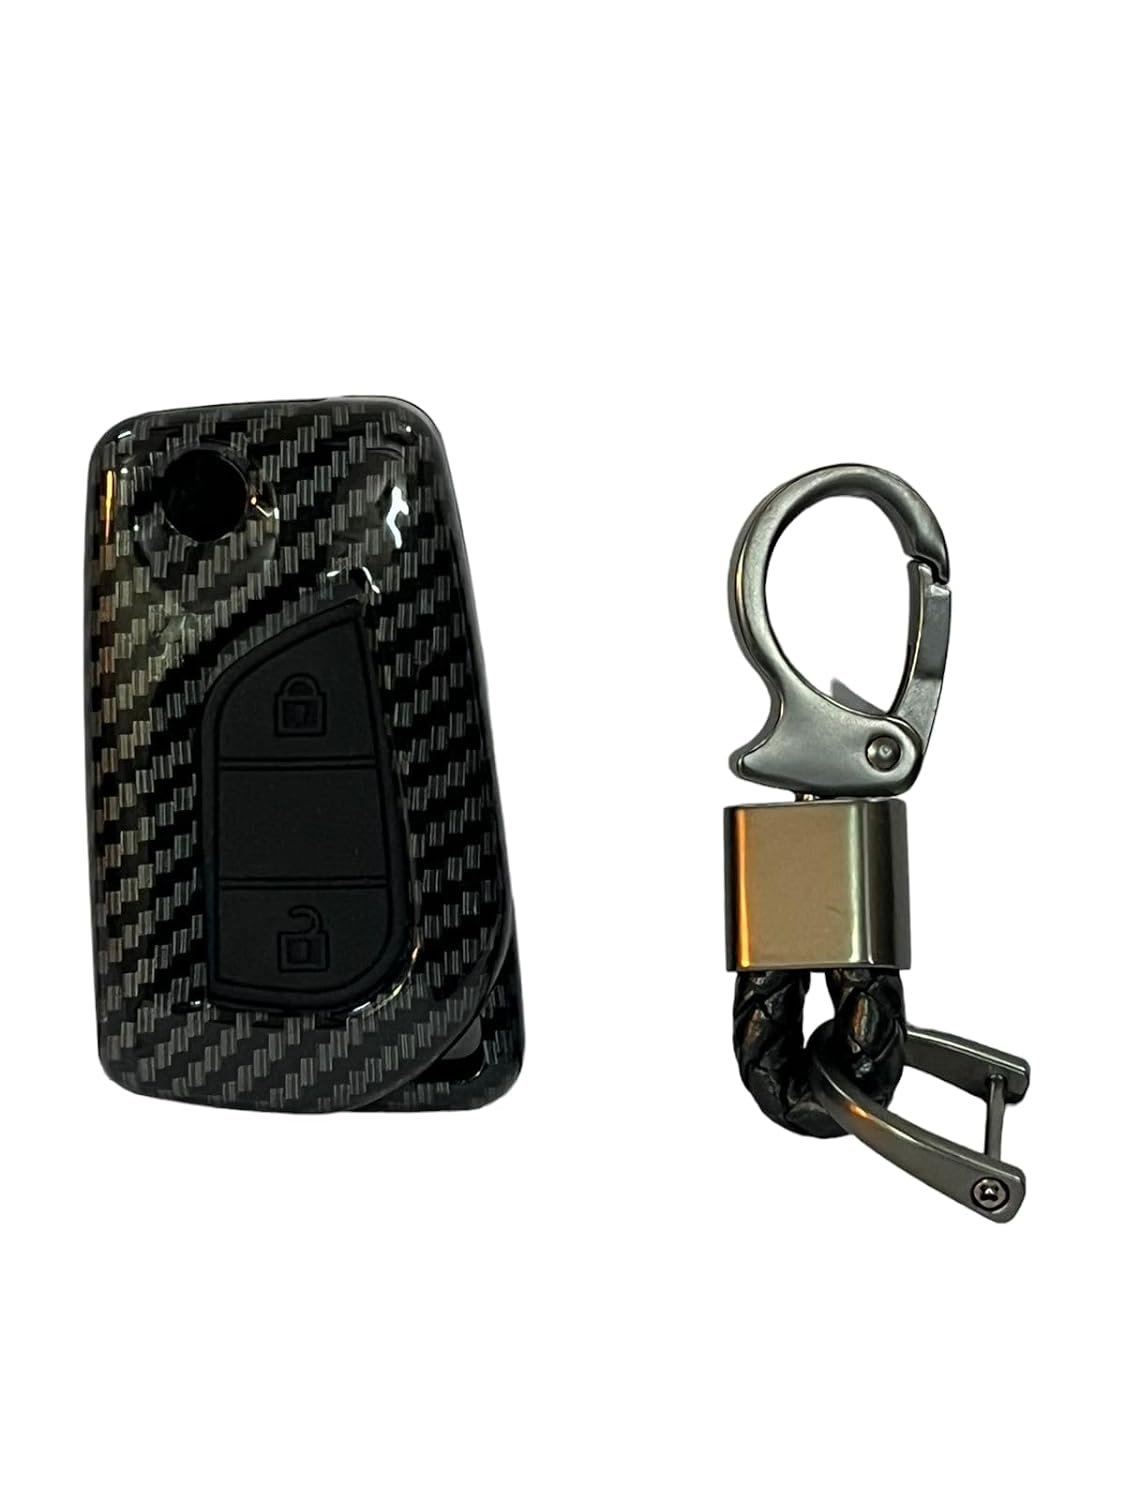 Carbon Fiber ABS Remote Key Cover Compatible with Fortuner, Innova, Camry 4/3 Buttons (Key Chain Included) Image 